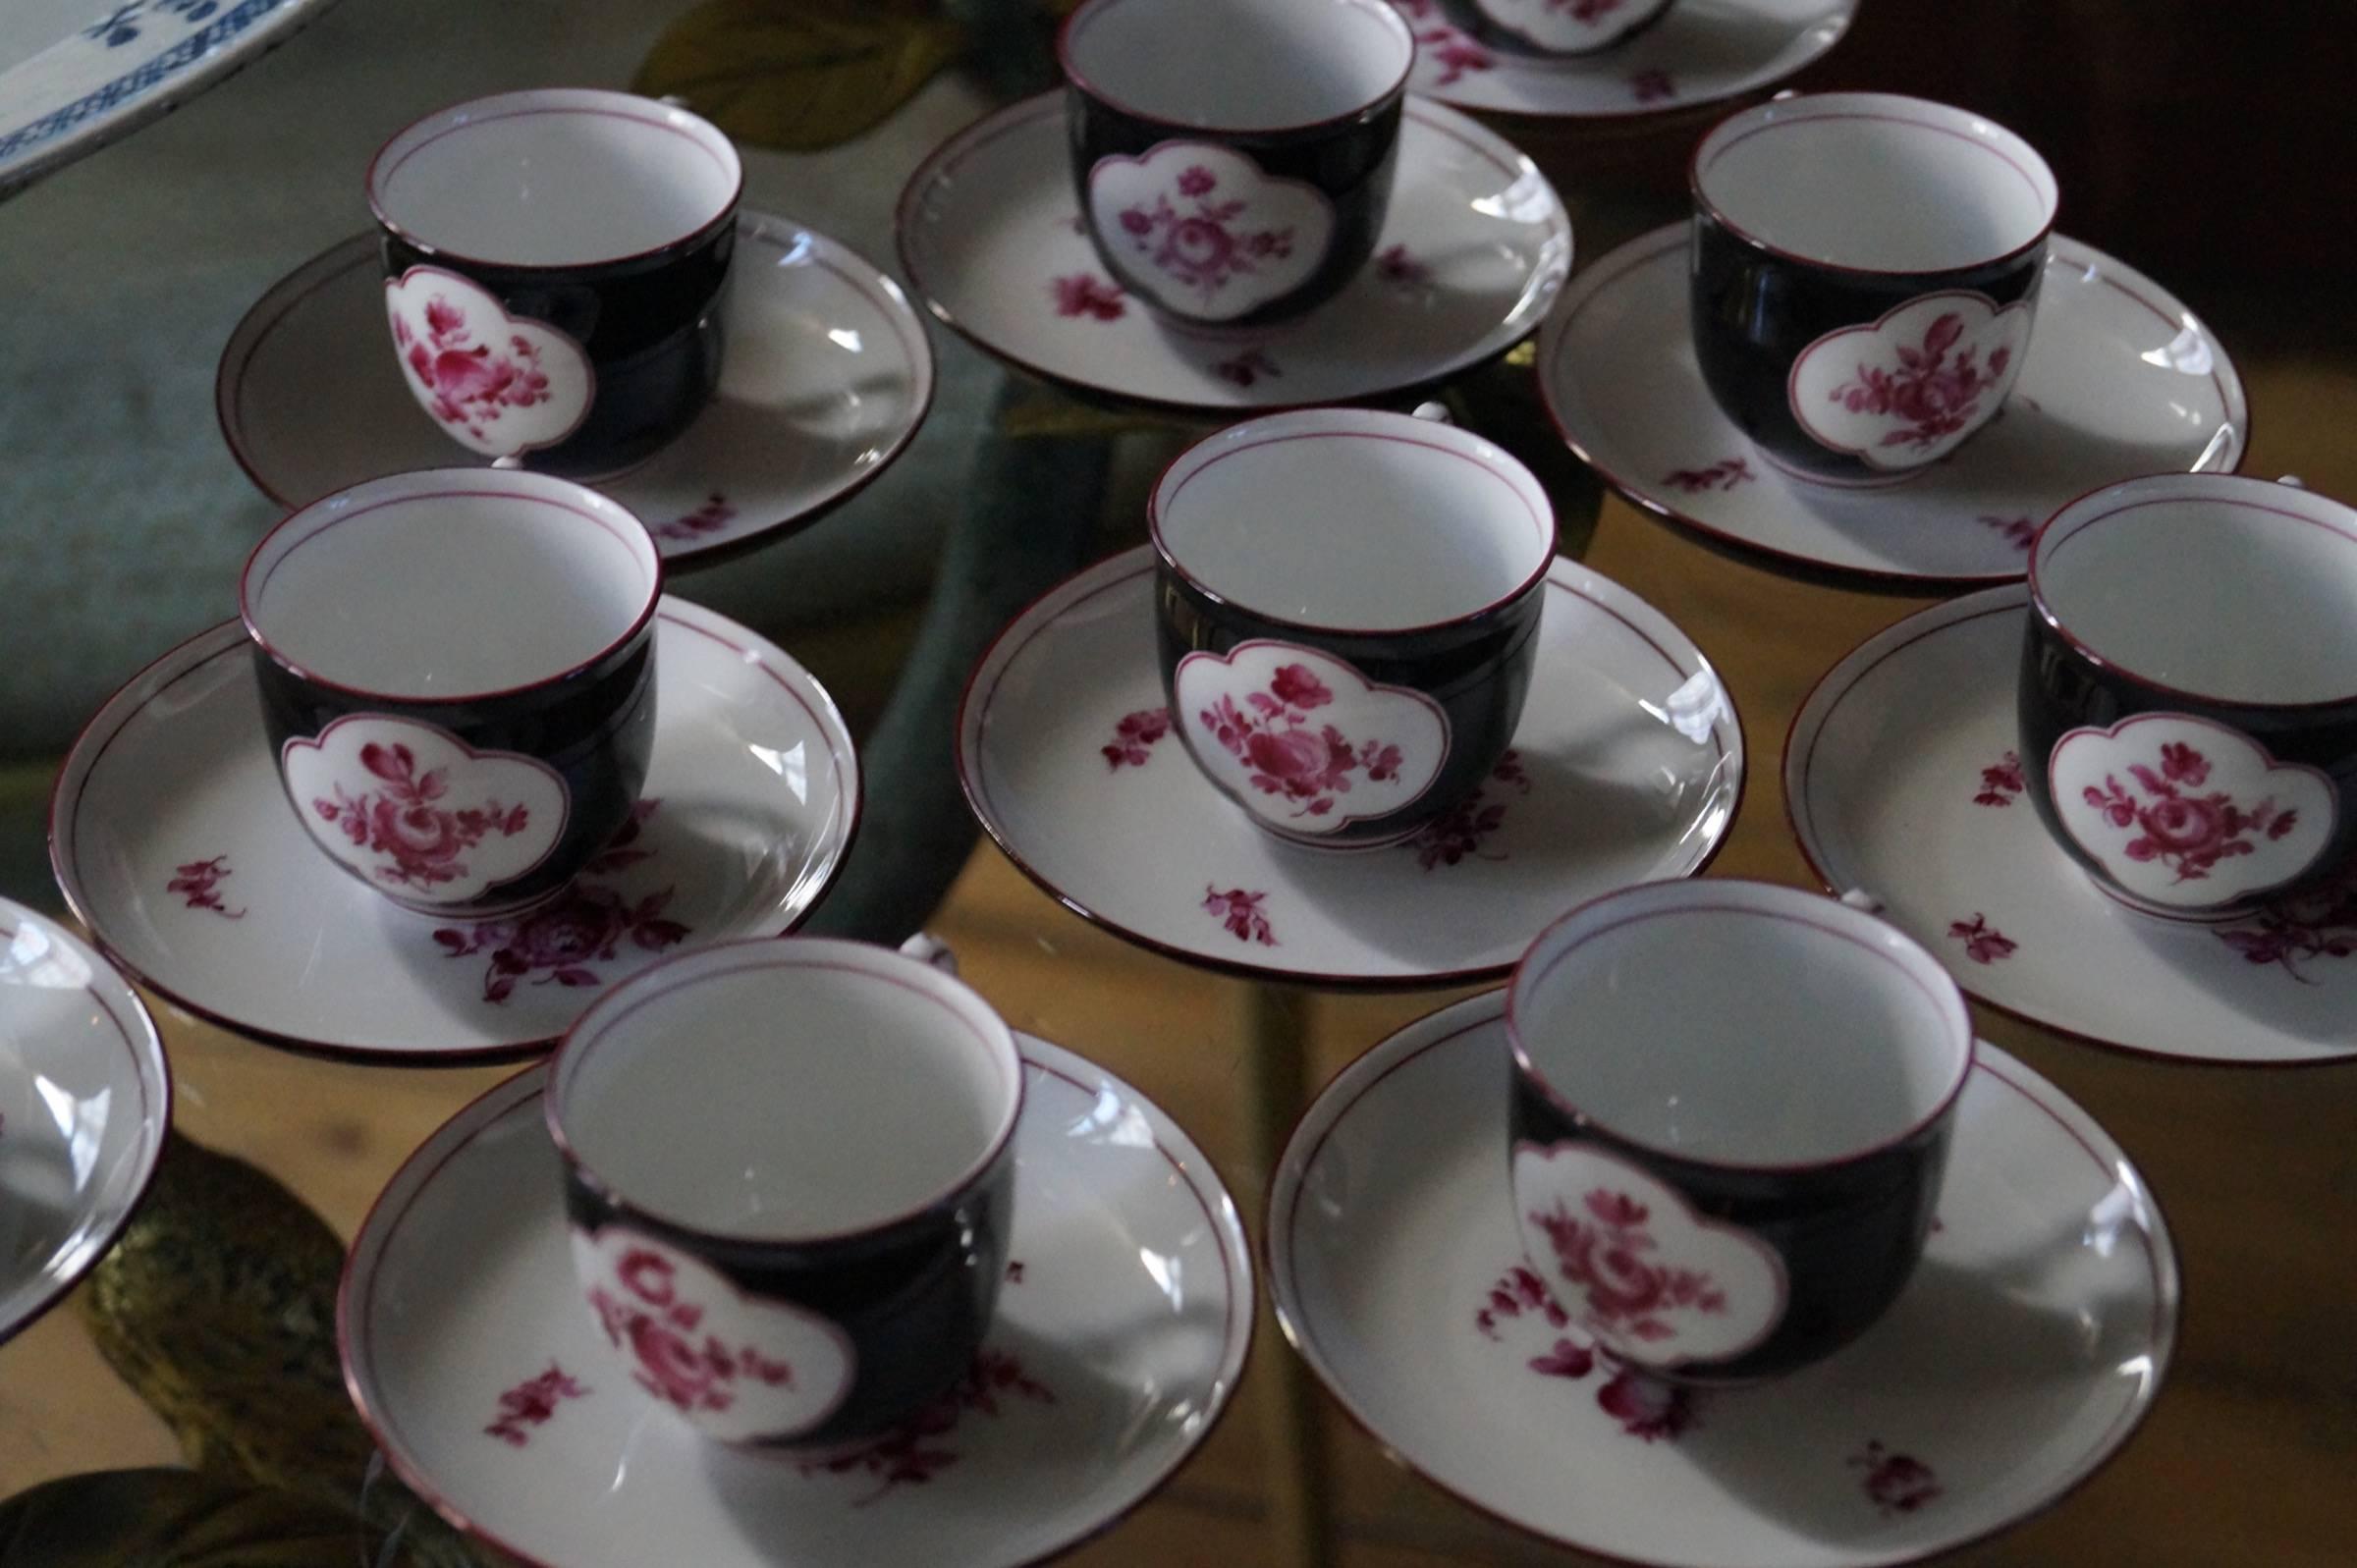 This Nymphenburg porcelain demitasse cup and saucers were produced in Germany in the late 19th century.
The set is designed in a elegant Chinese style. The colors used are black and magenta. The flowers are hand-painted.

Measures: 10x Demitasse